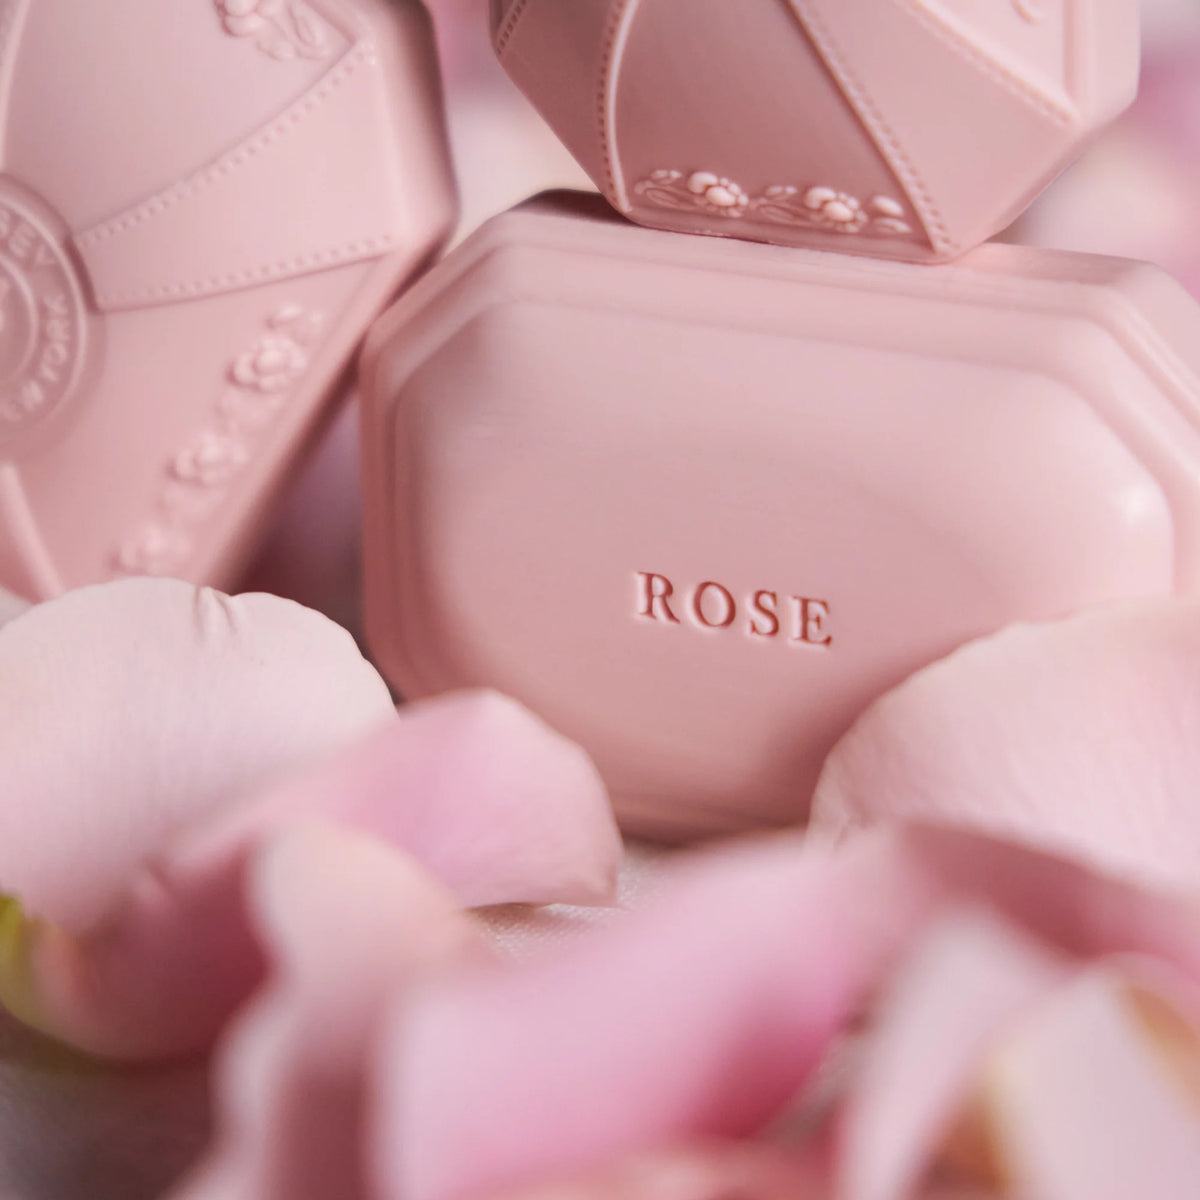 Close-up of soft pink skincare products with embossed details, surrounded by delicate rose petals. The word "rose" is prominently displayed on a Caswell Massey Rose Luxury Bar Soap 100g.